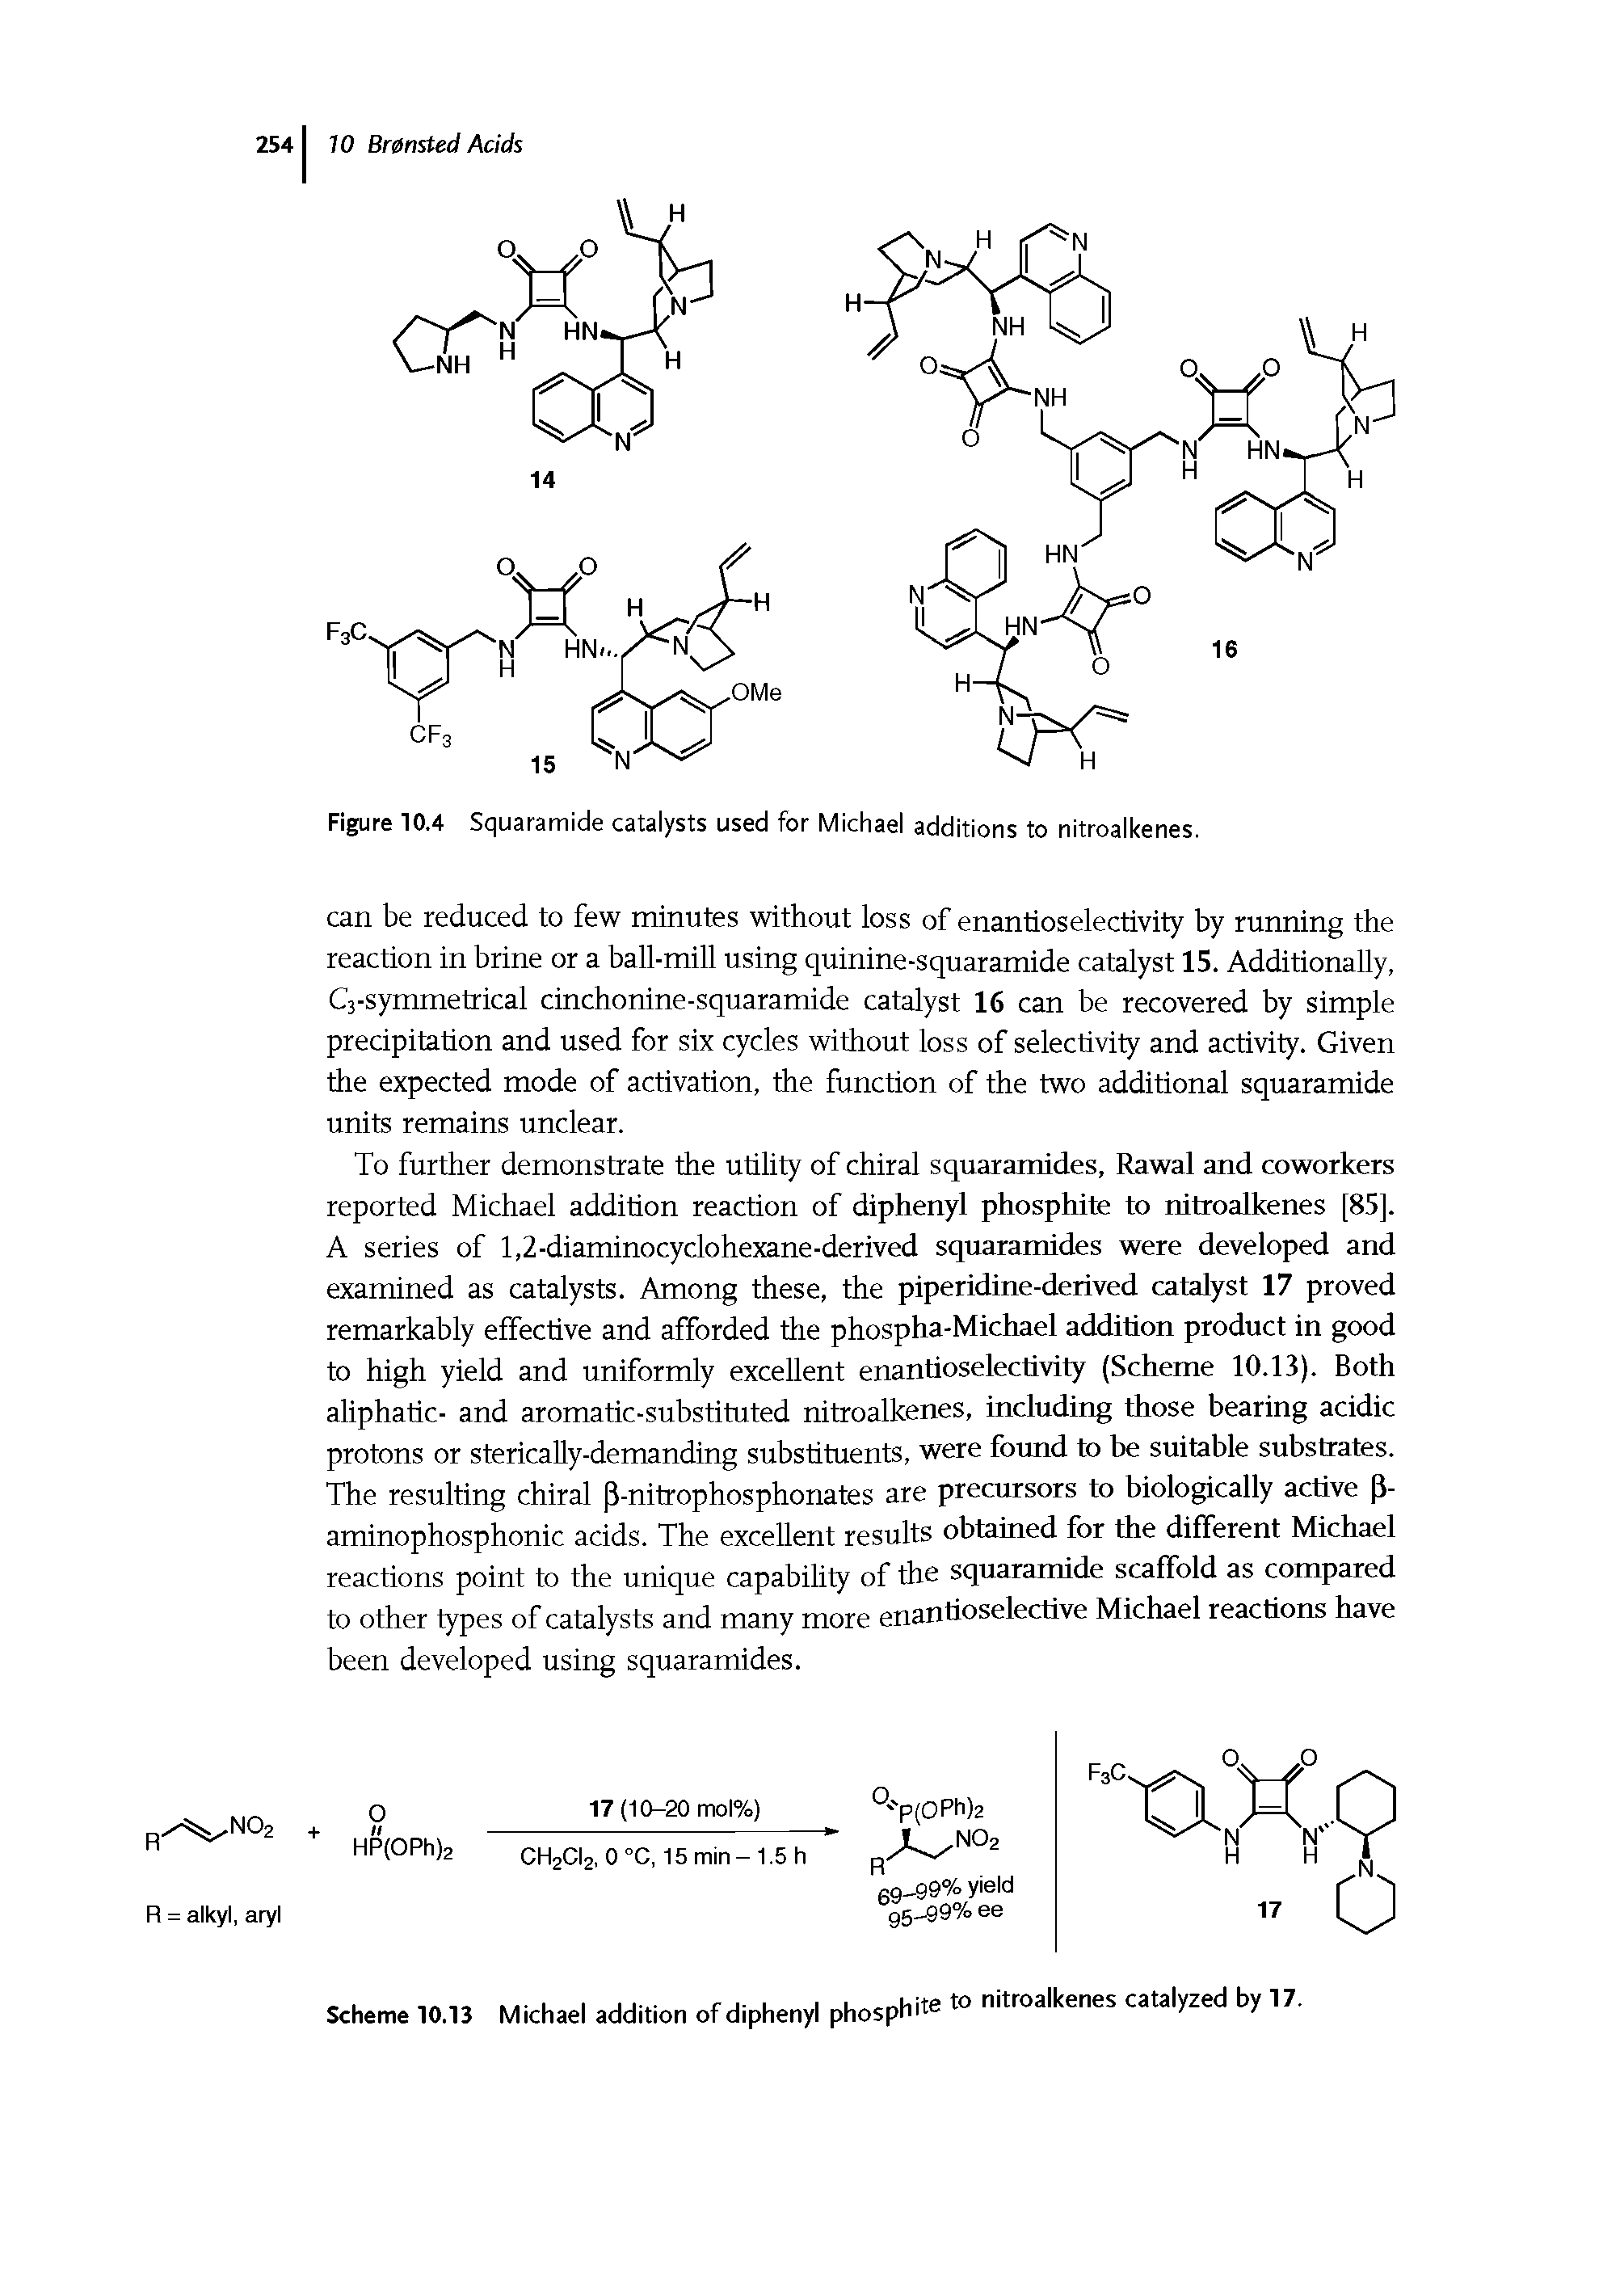 Figure 10.4 Squaramide catalysts used for Michael additions to nitroalkenes.